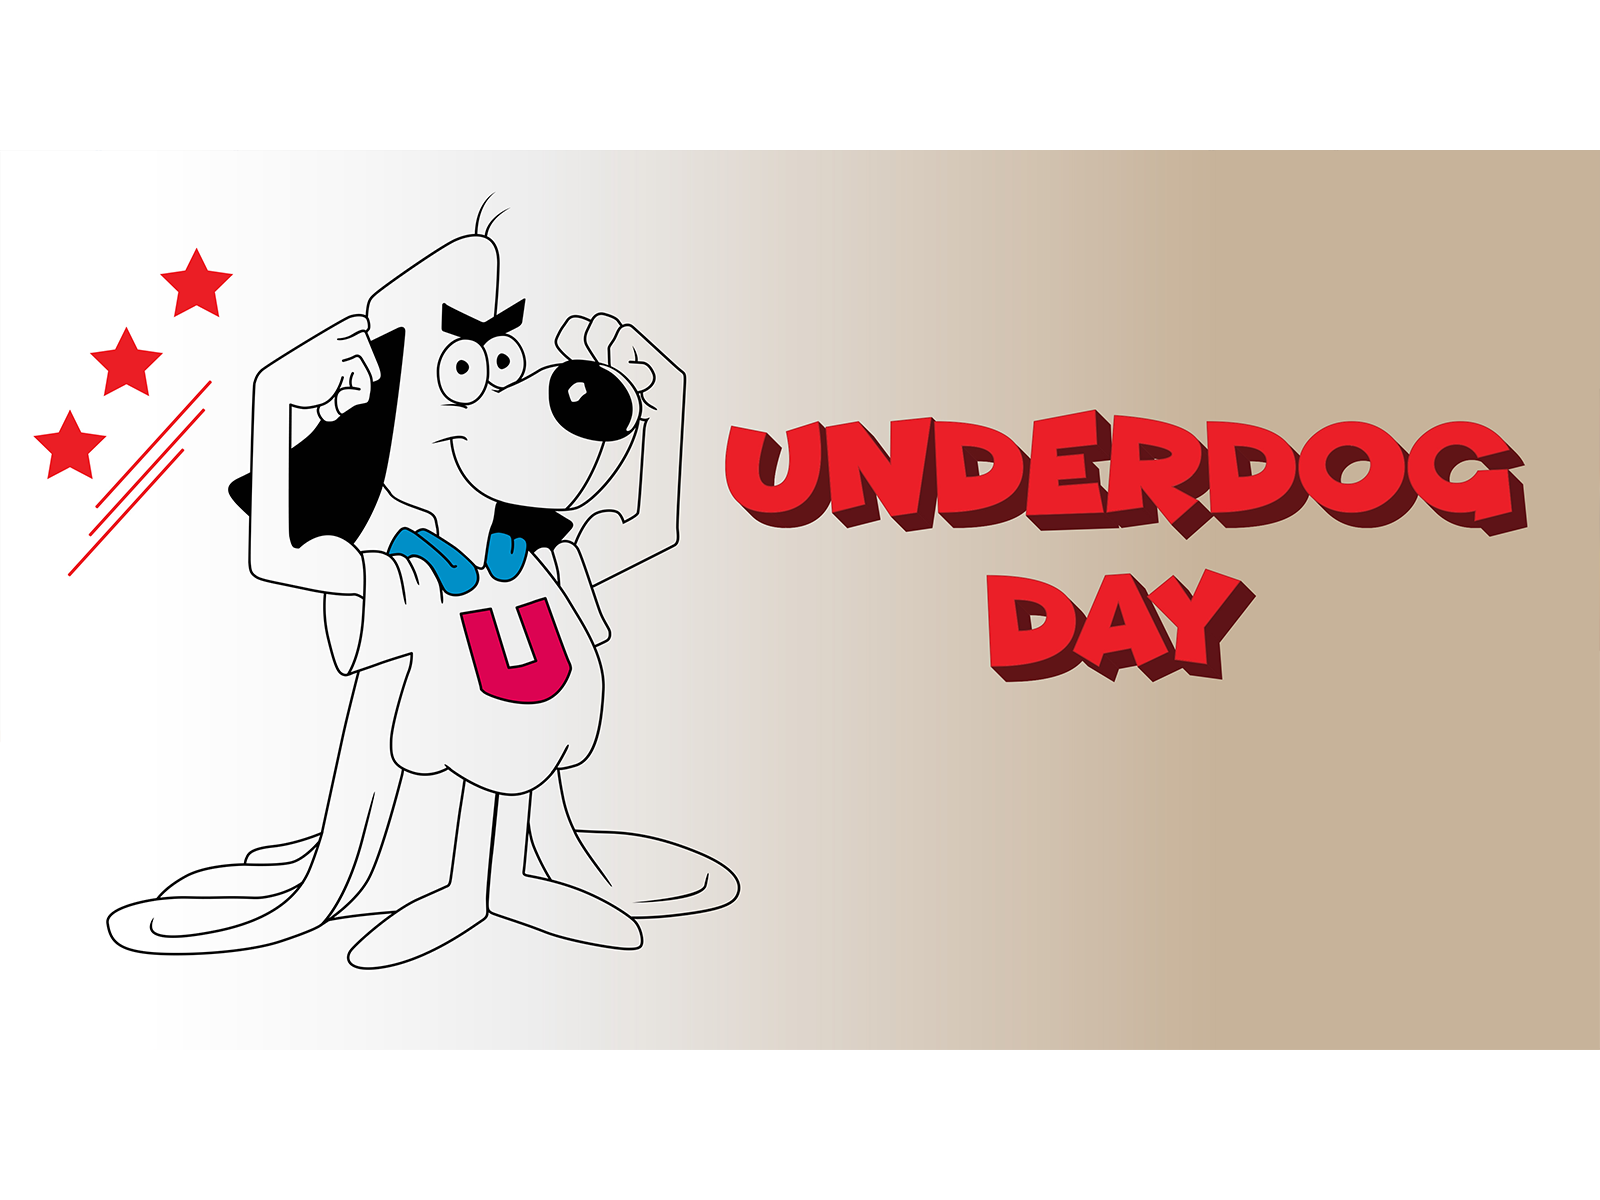 underdog day by Faisal Chheena on Dribbble